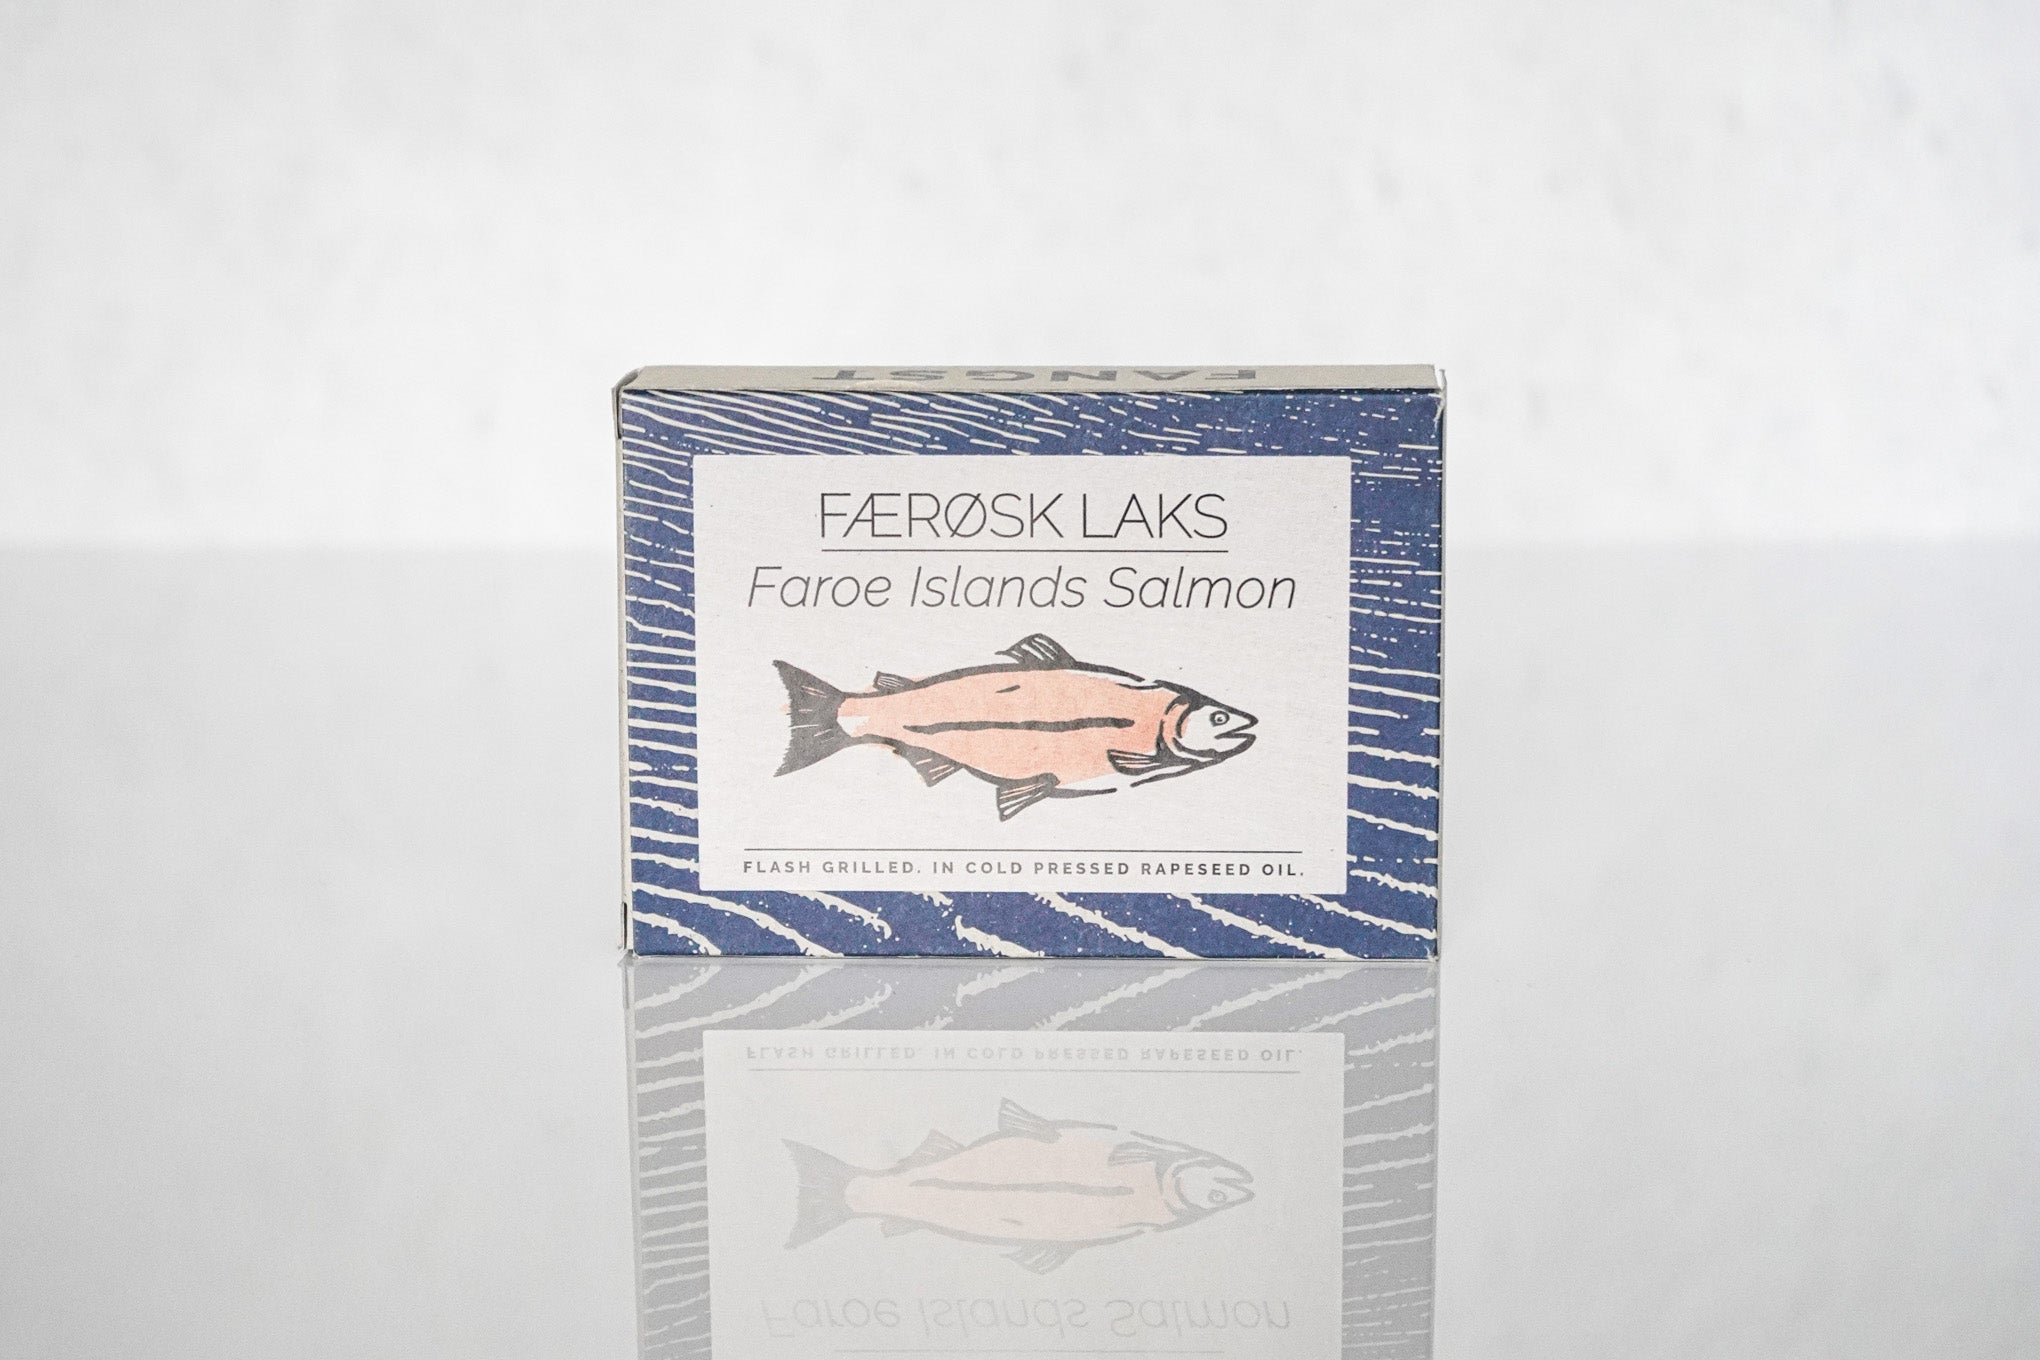 Fangst Faroe Islands Salmon flash grilled in cold pressed rapeseed oil box